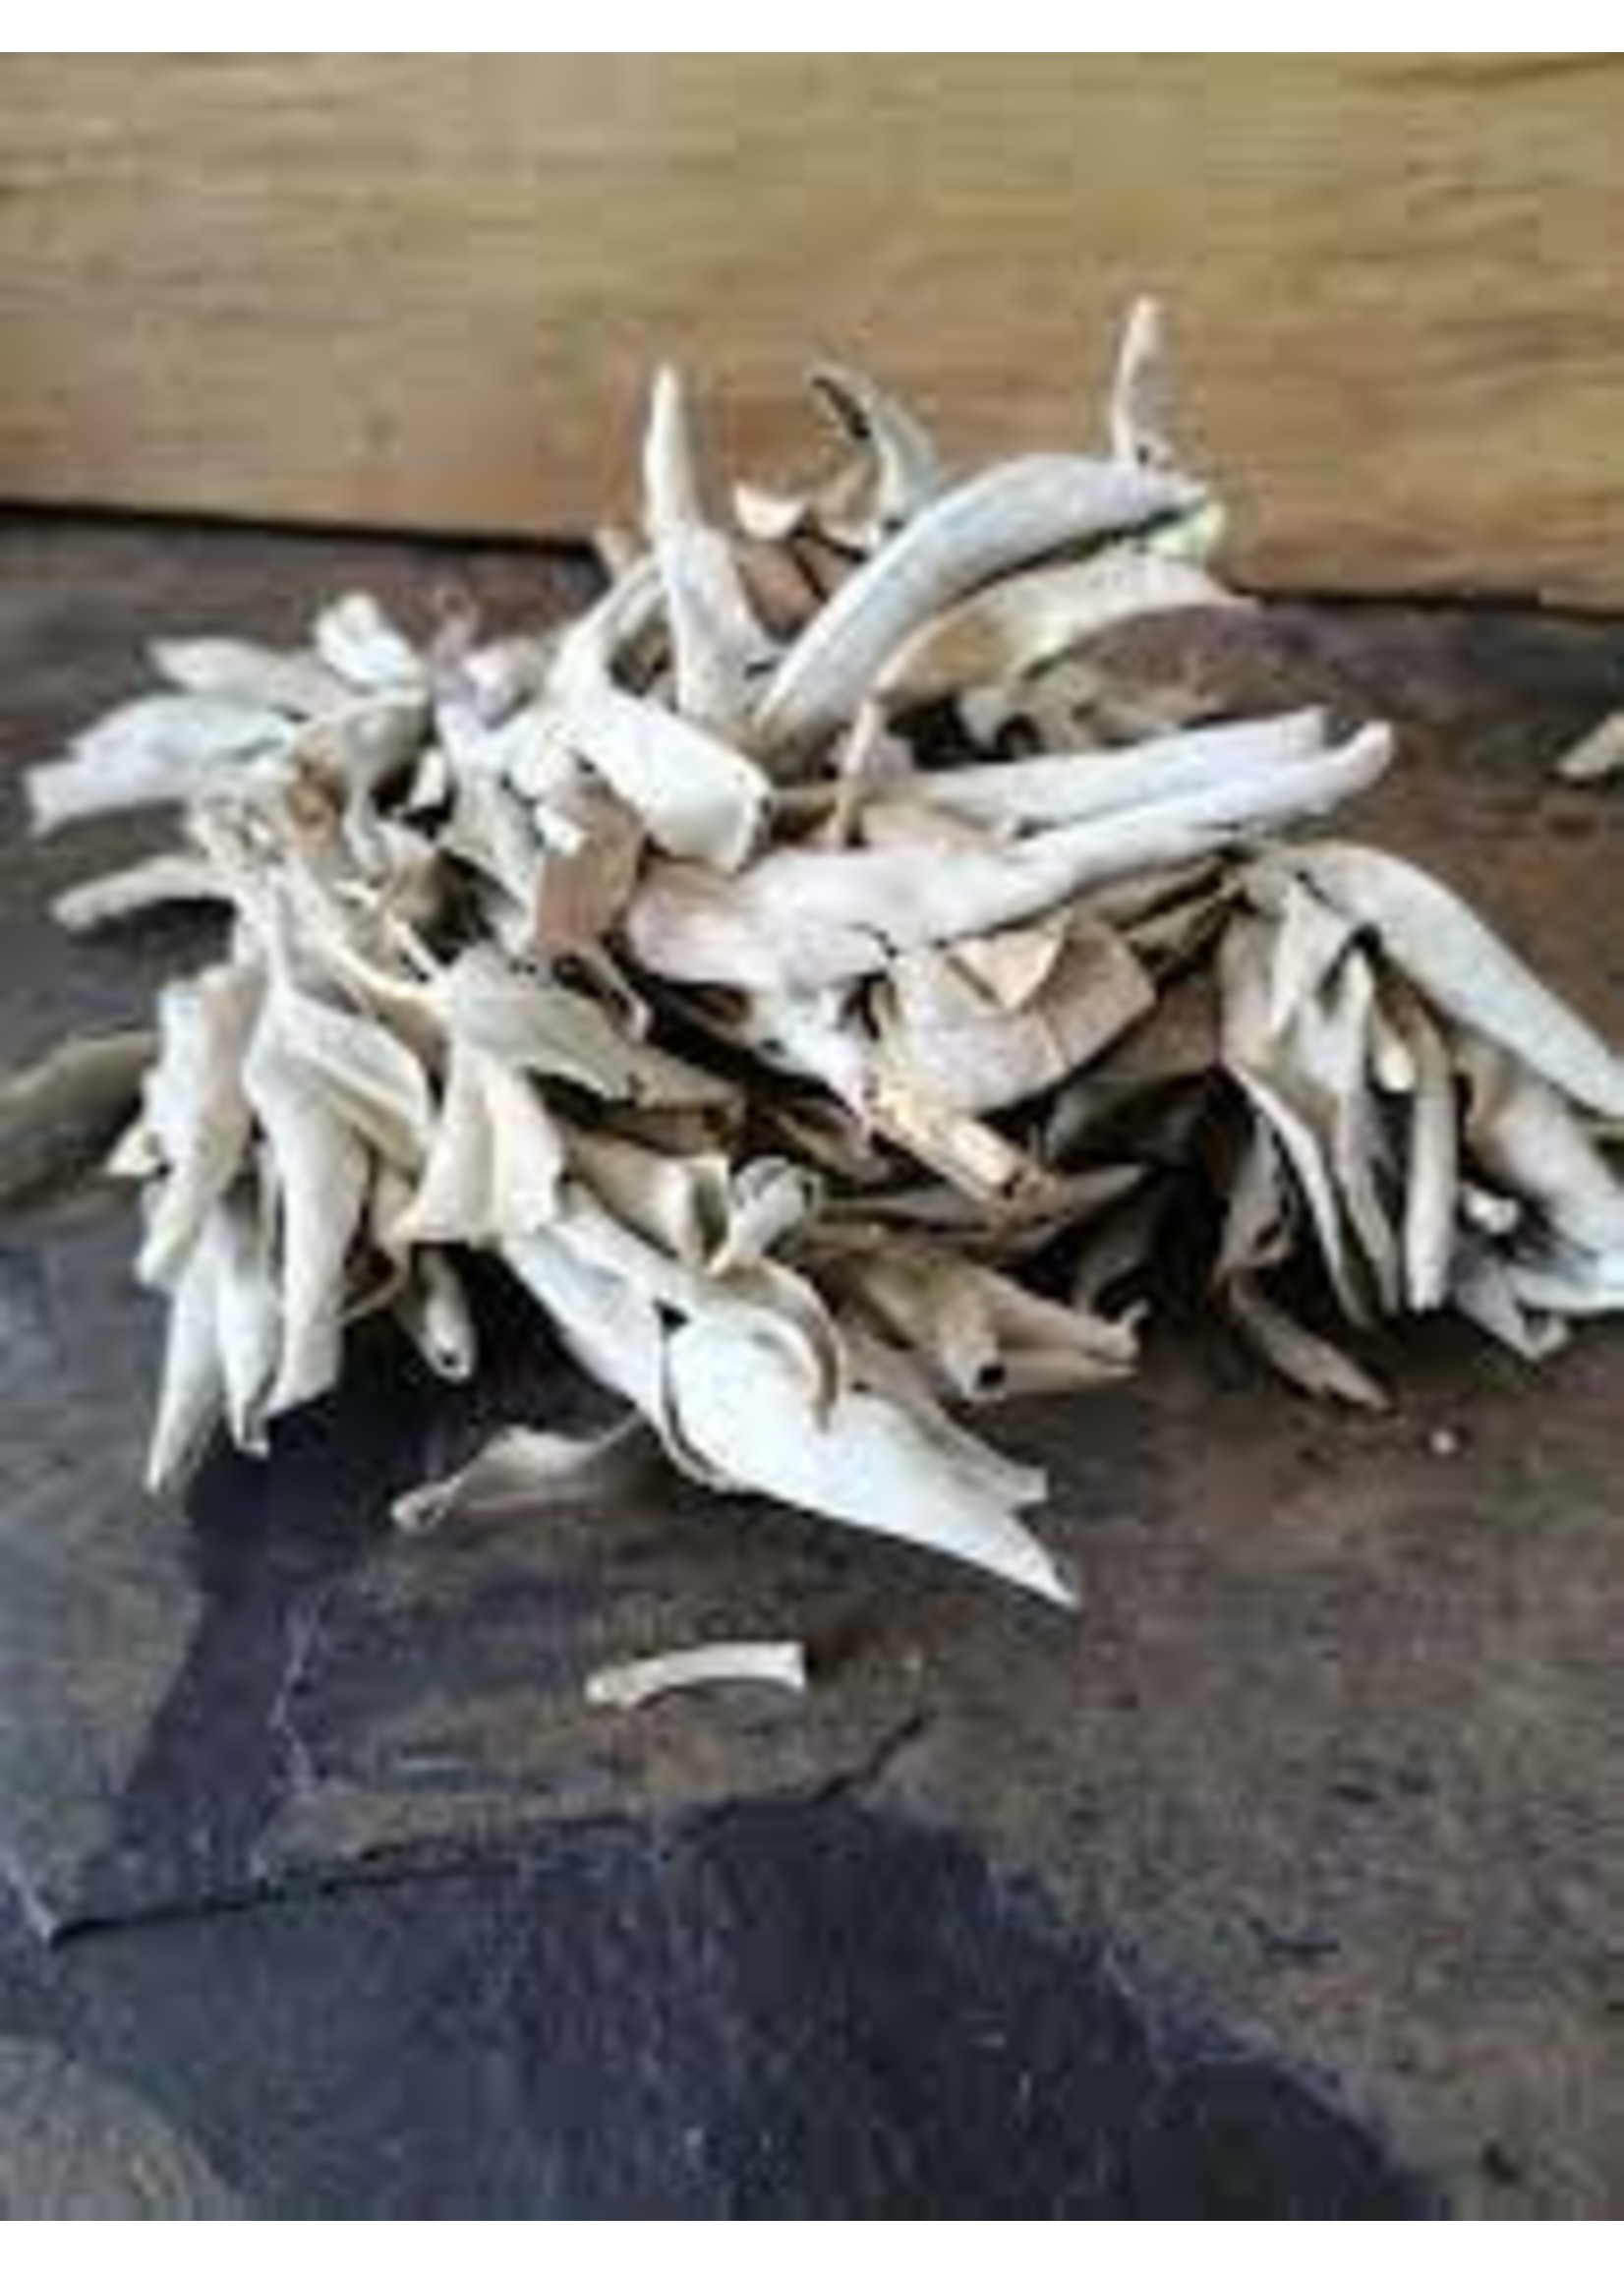 Pure California White Sage Cluster- 1 oz Package for Cleansing and Protection with 100% Natural Aromatic Herbs